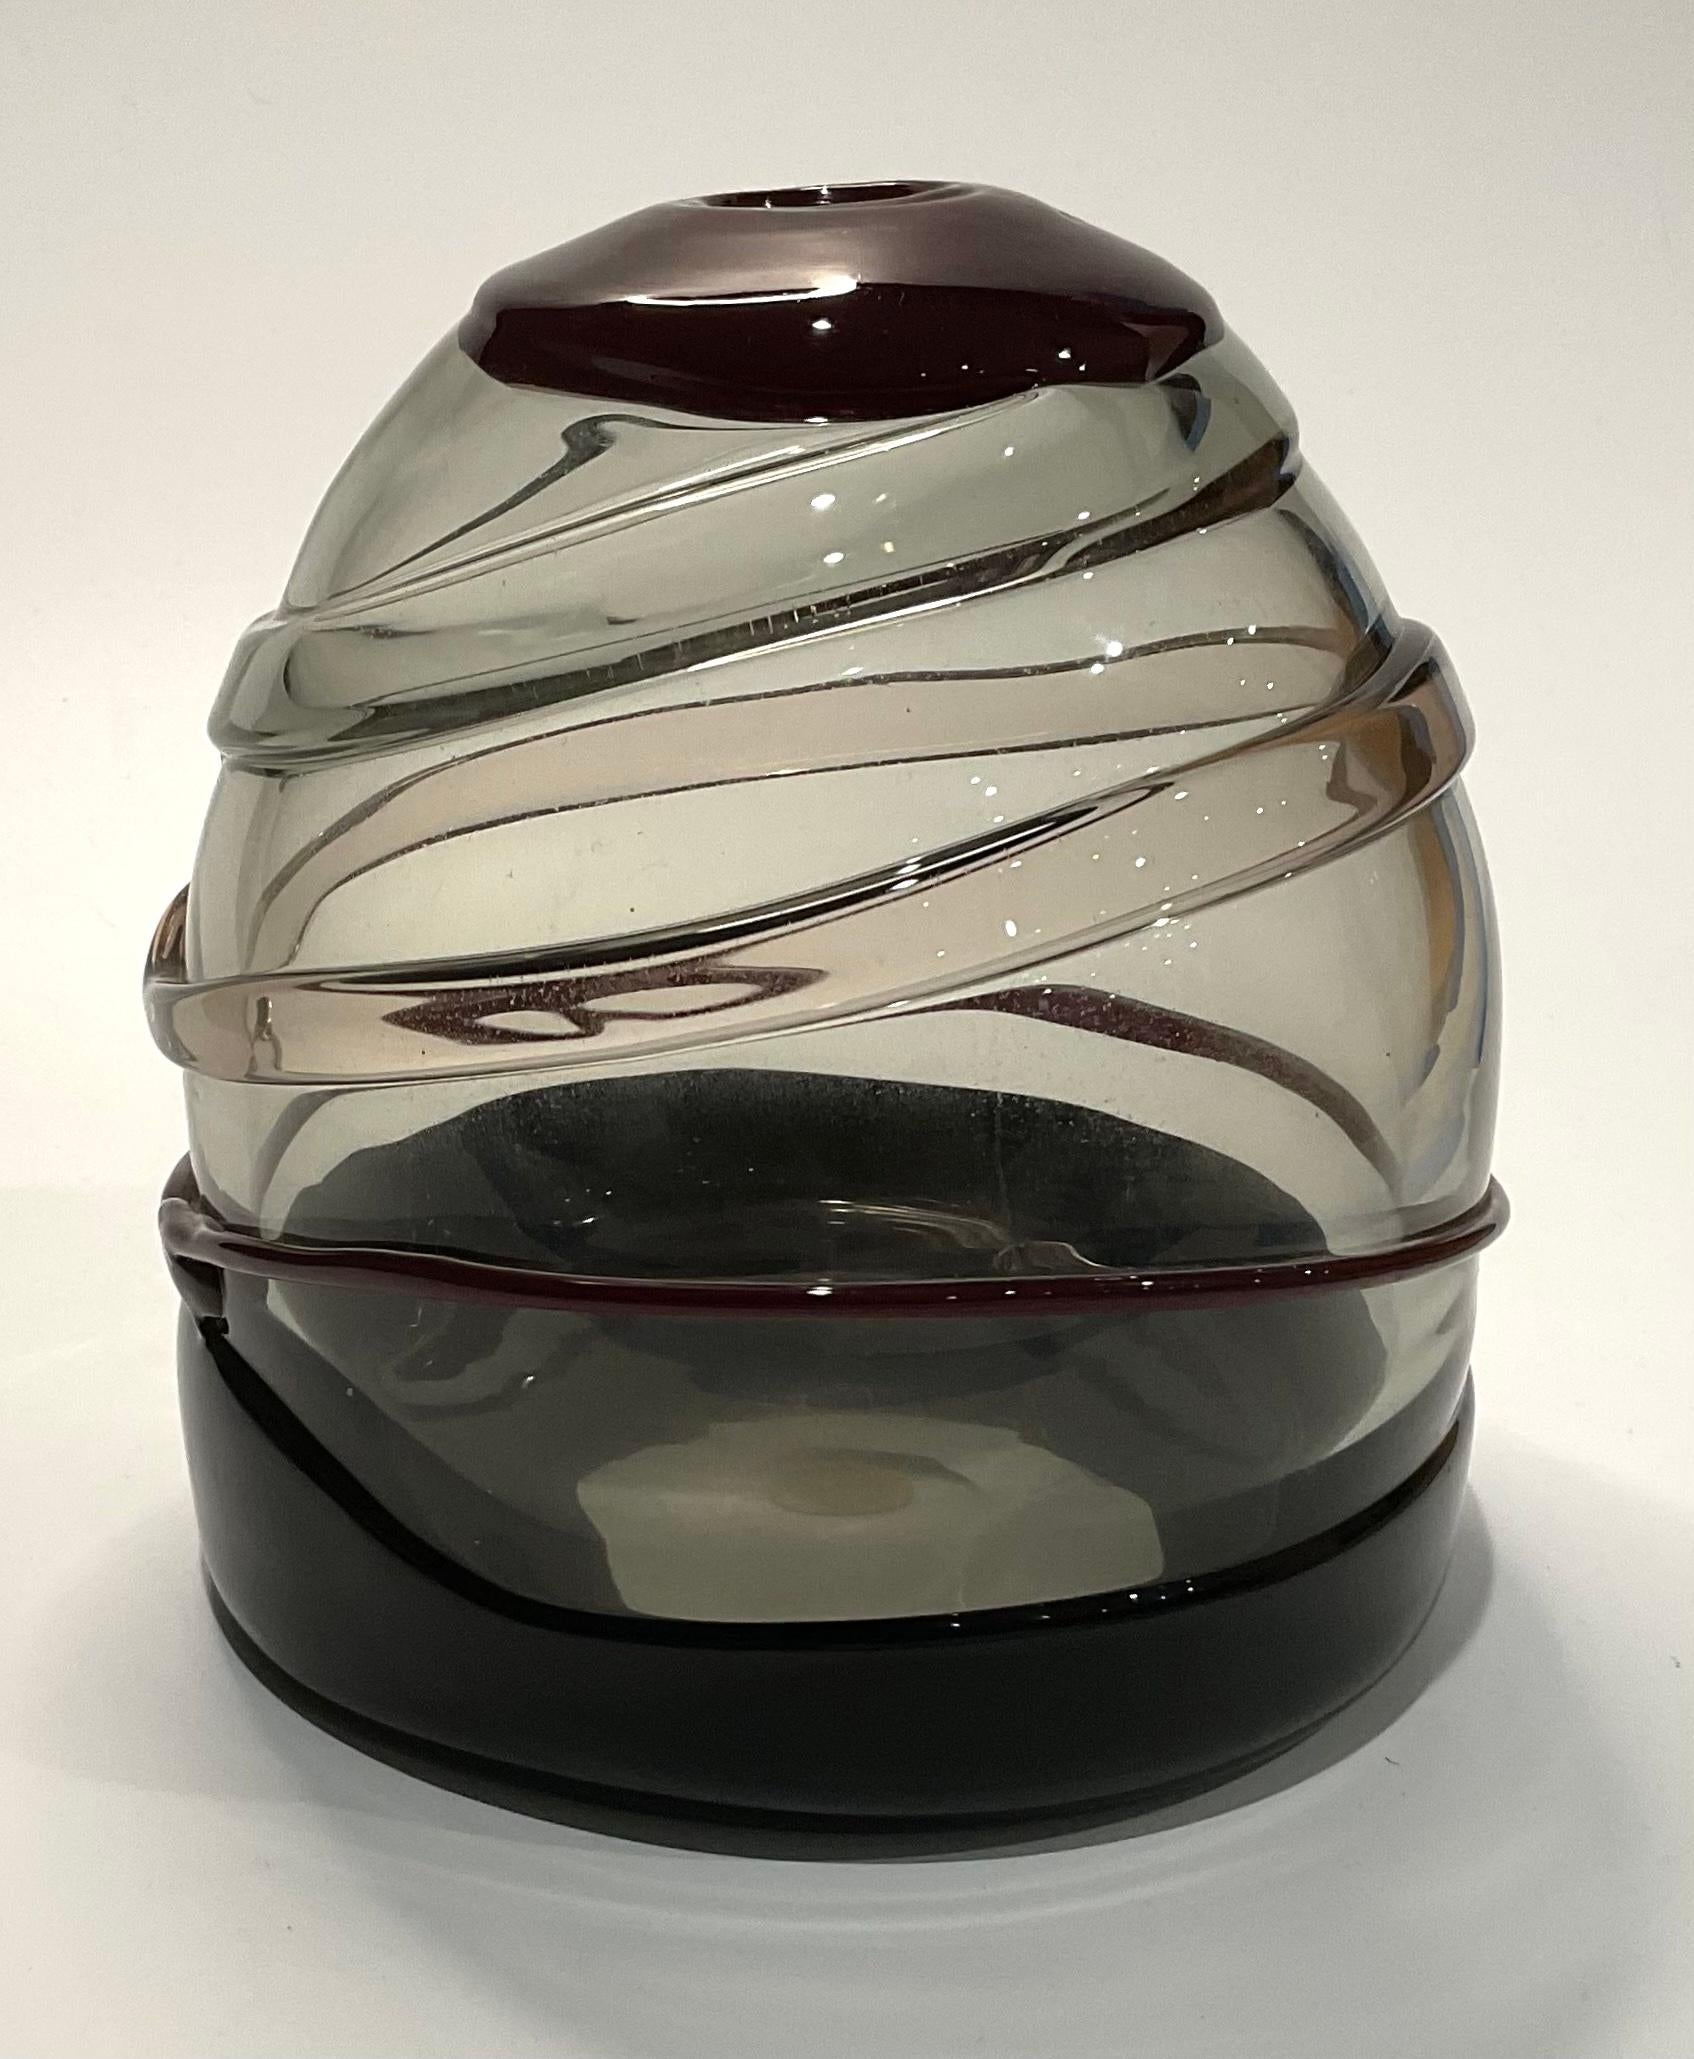 Luciano Gaspari Artist Signed Murano Art Glass Sasso Vase with Applied Bands  In Good Condition For Sale In Ann Arbor, MI